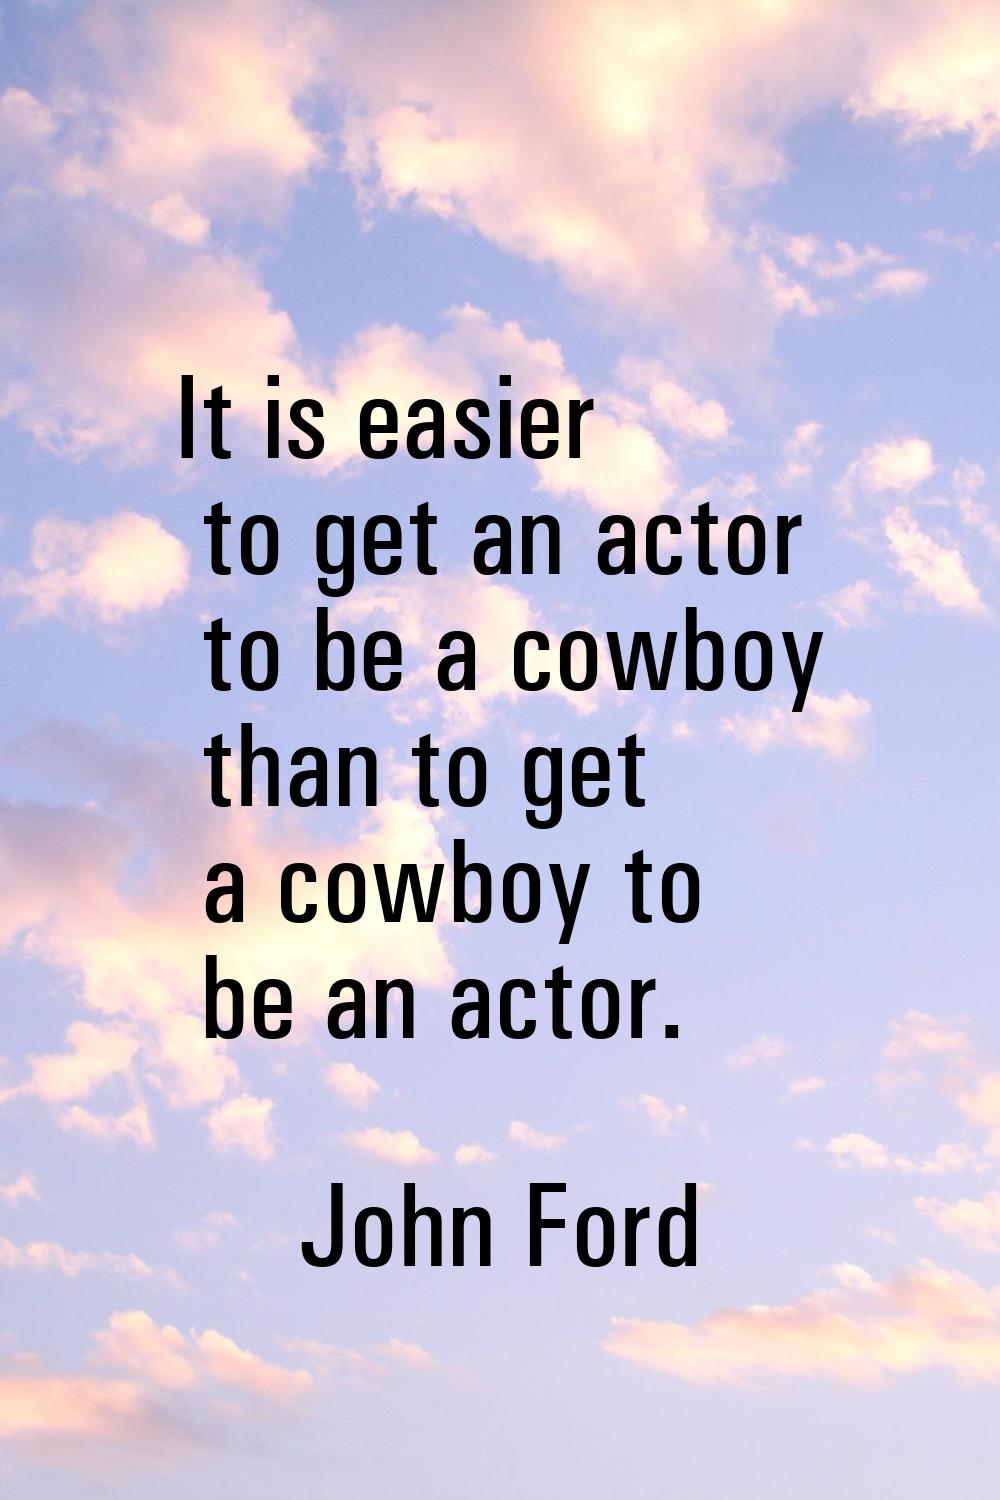 It is easier to get an actor to be a cowboy than to get a cowboy to be an actor.